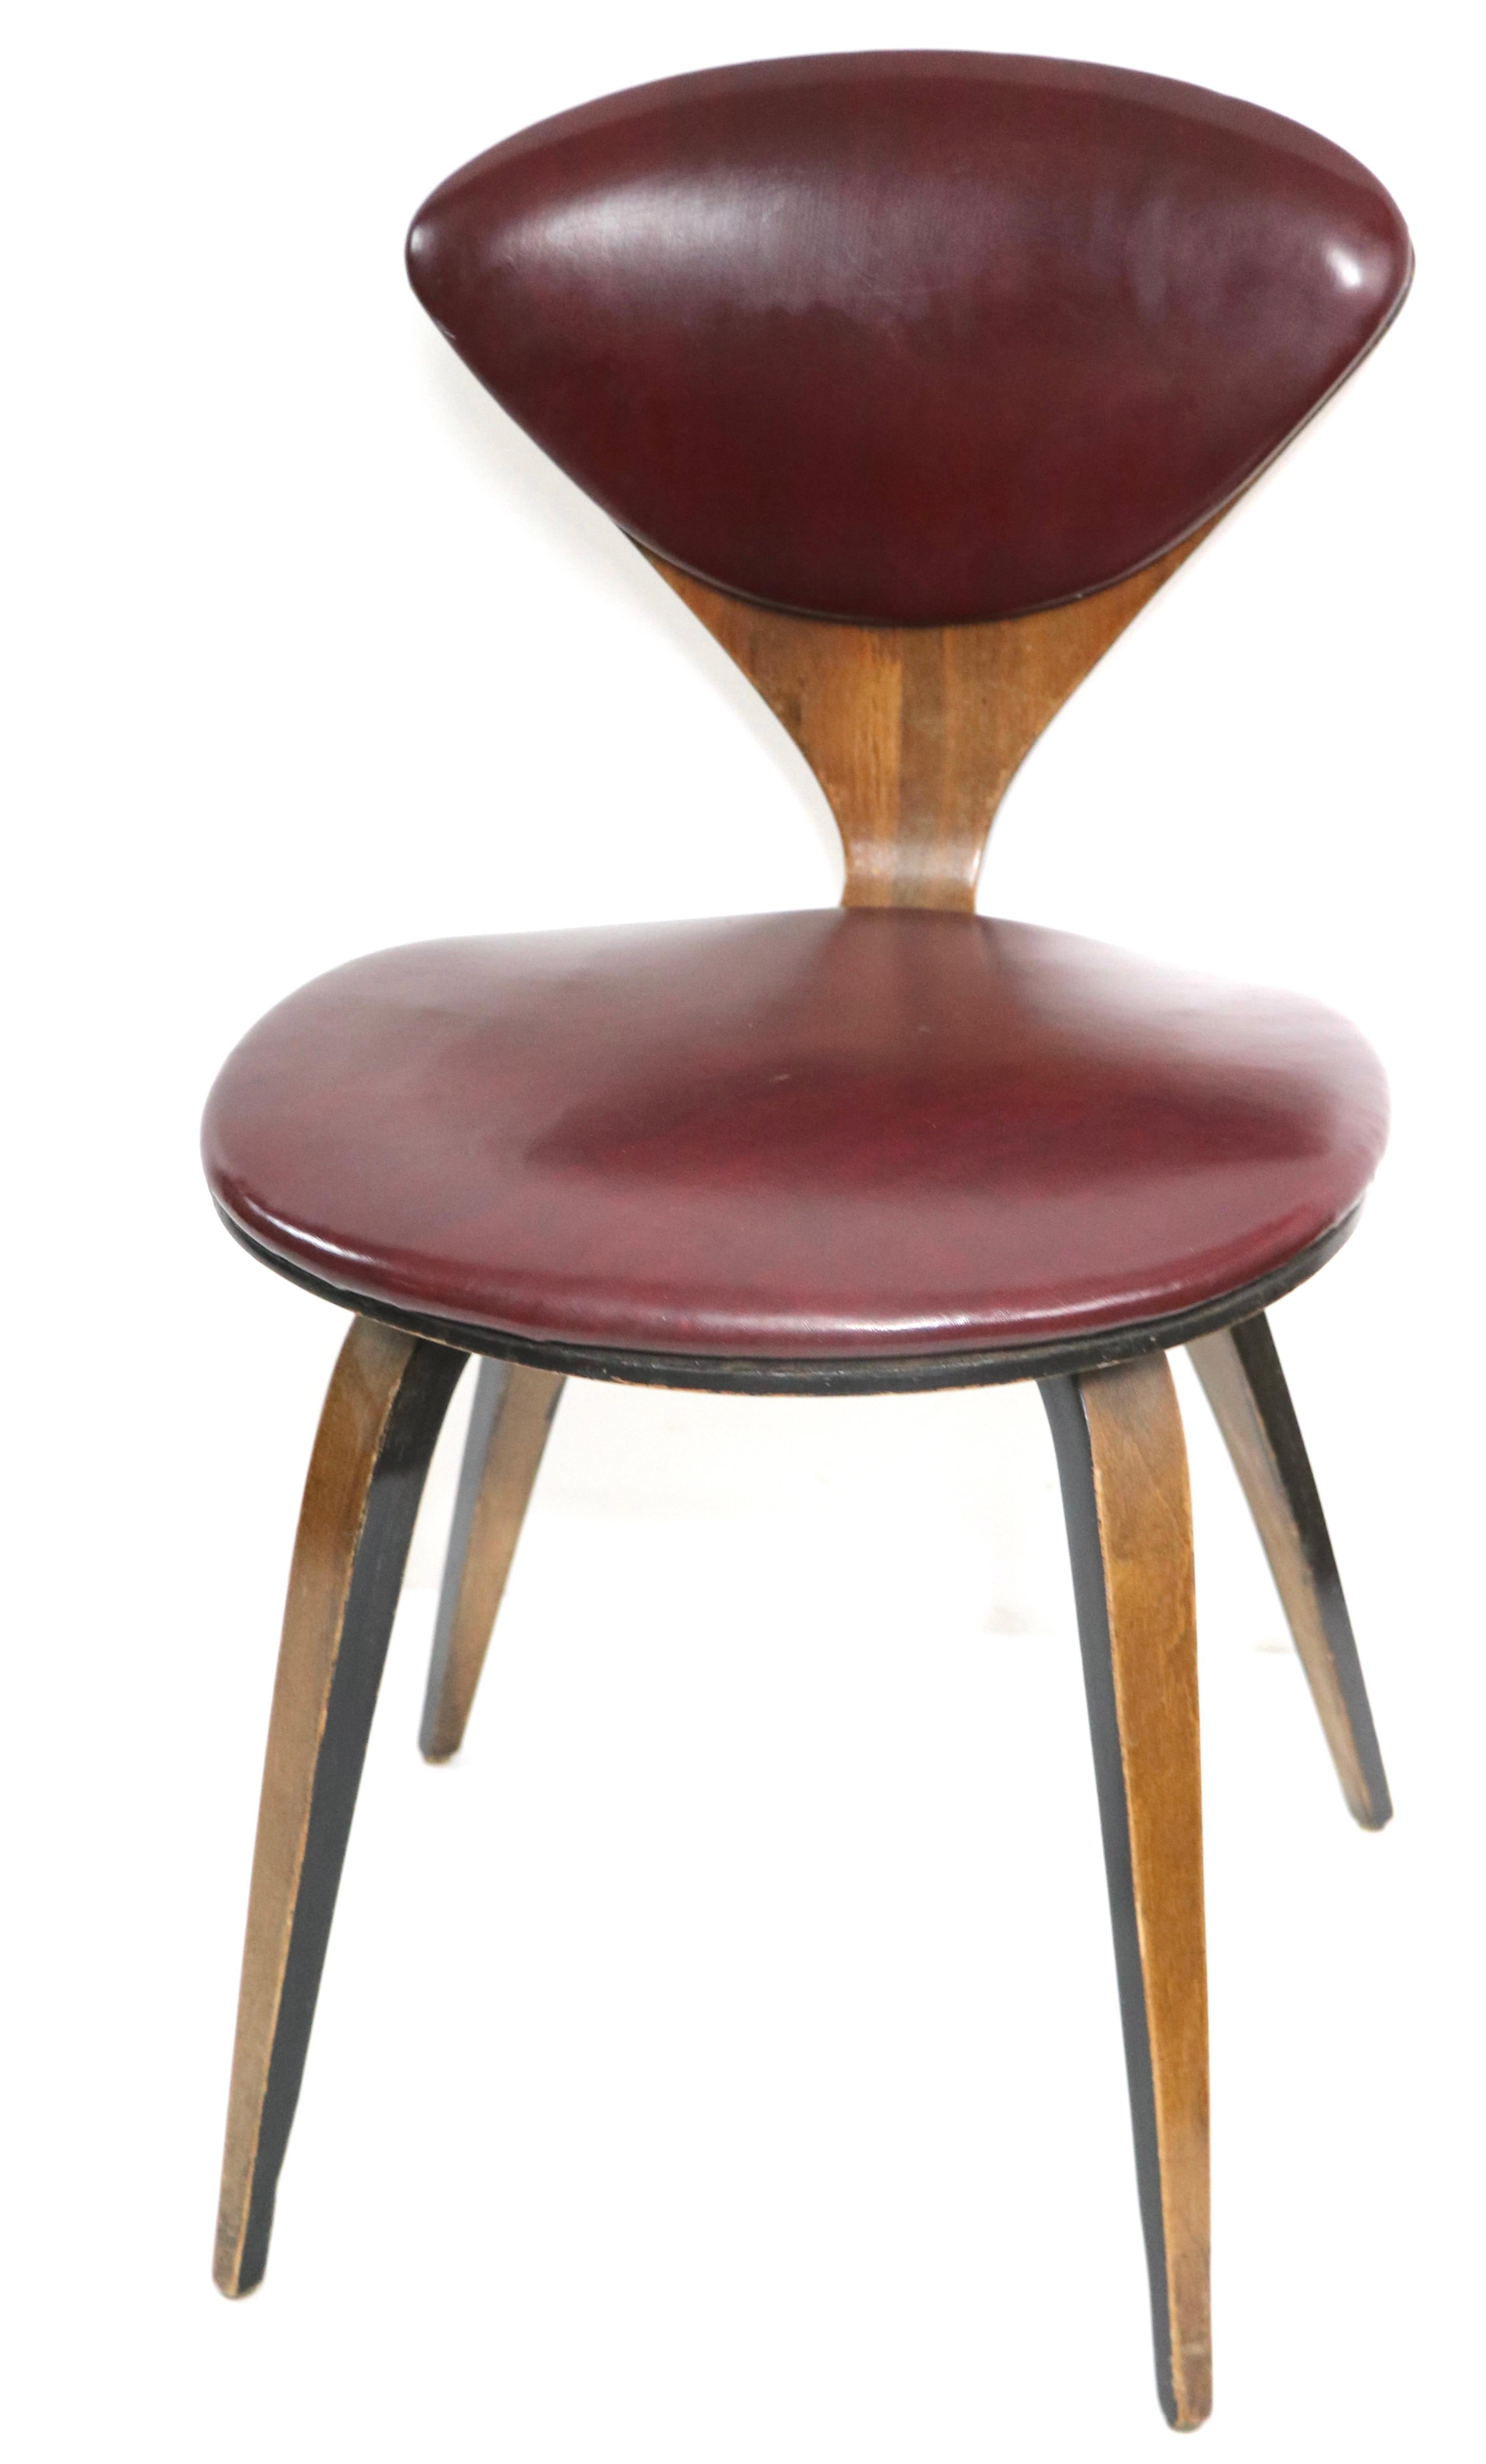 Iconic Mid Century Cherner Plycraft Bent Ply Chair For Sale 1